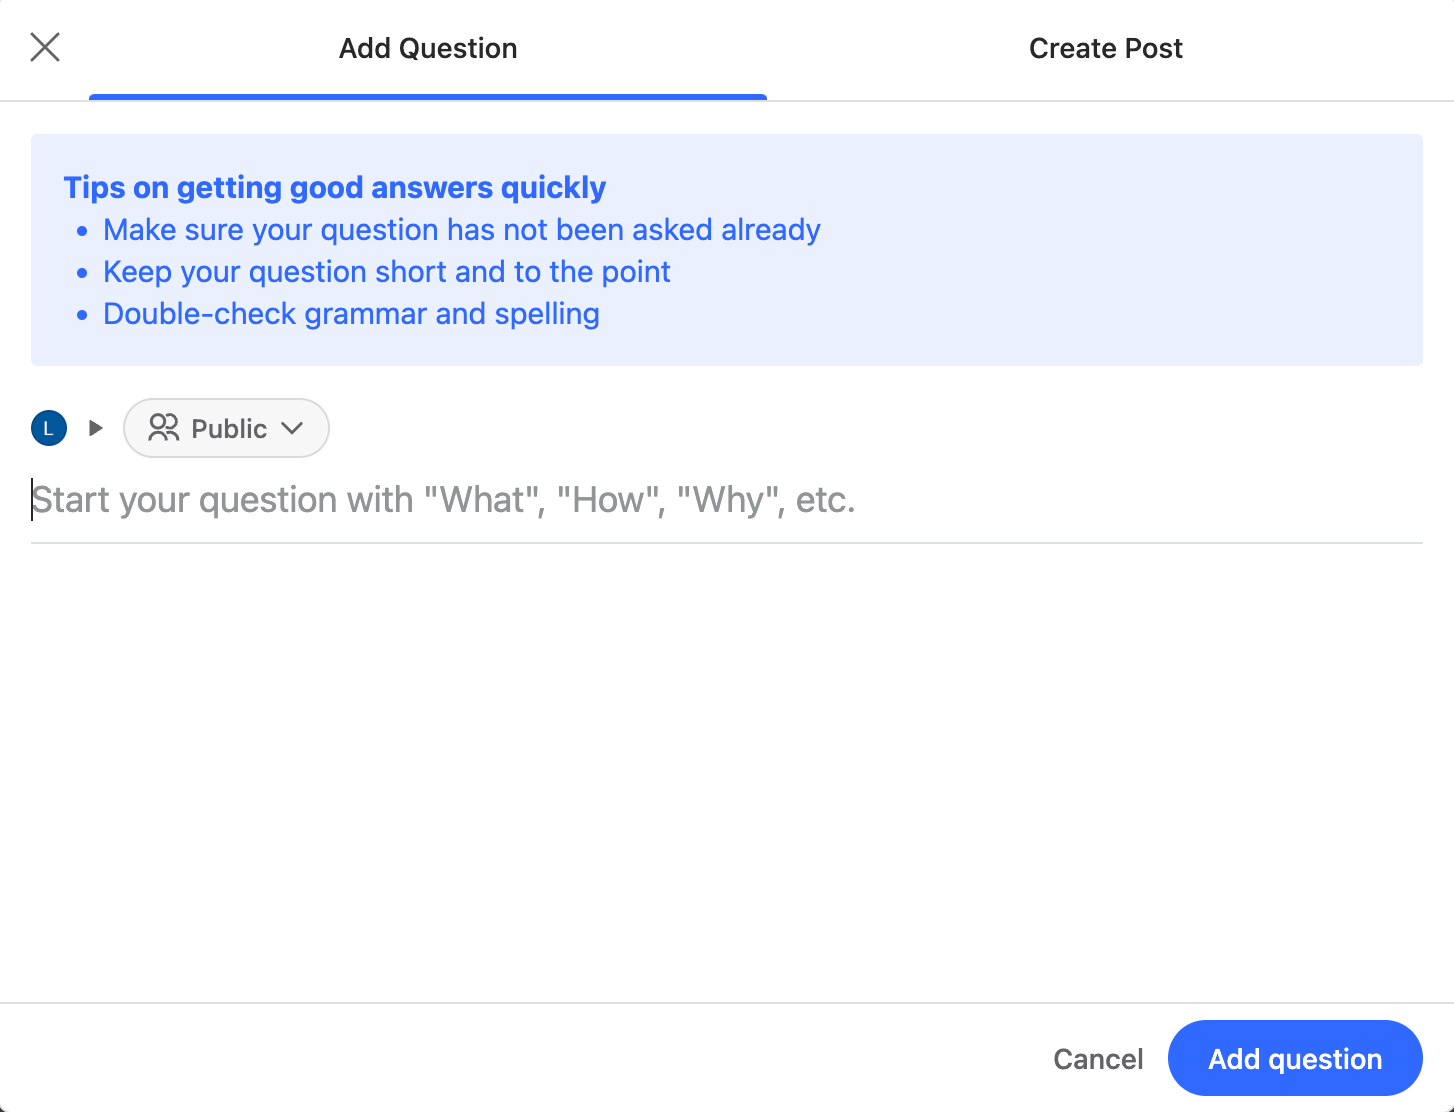 The "Add question" popup